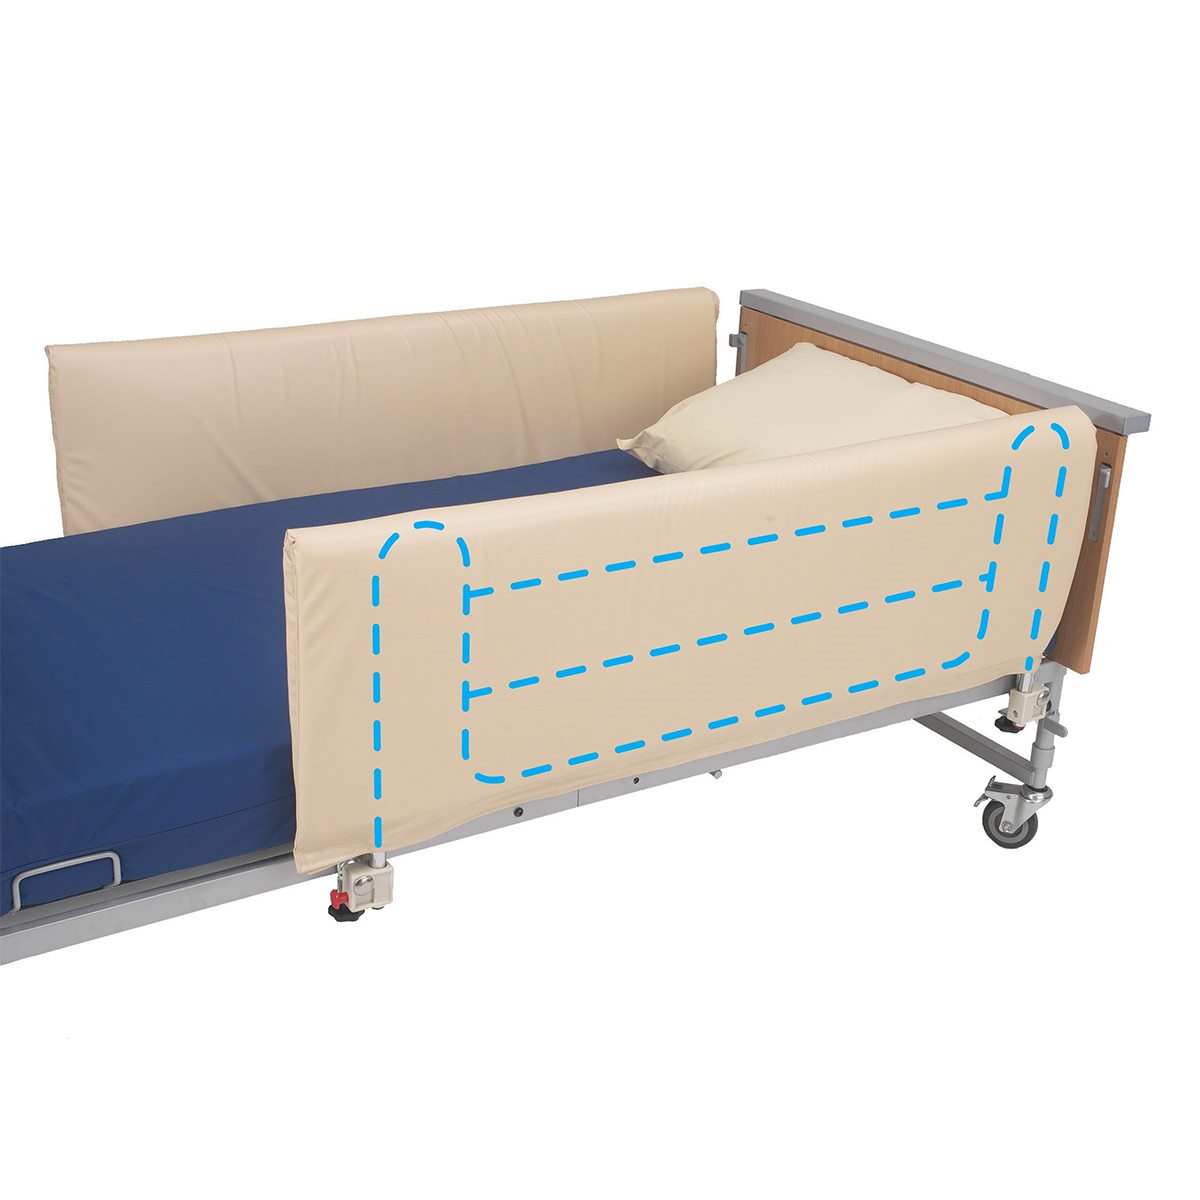 Cots with side protection cot side bumper for 3 or 4 bar rails QCWIERY